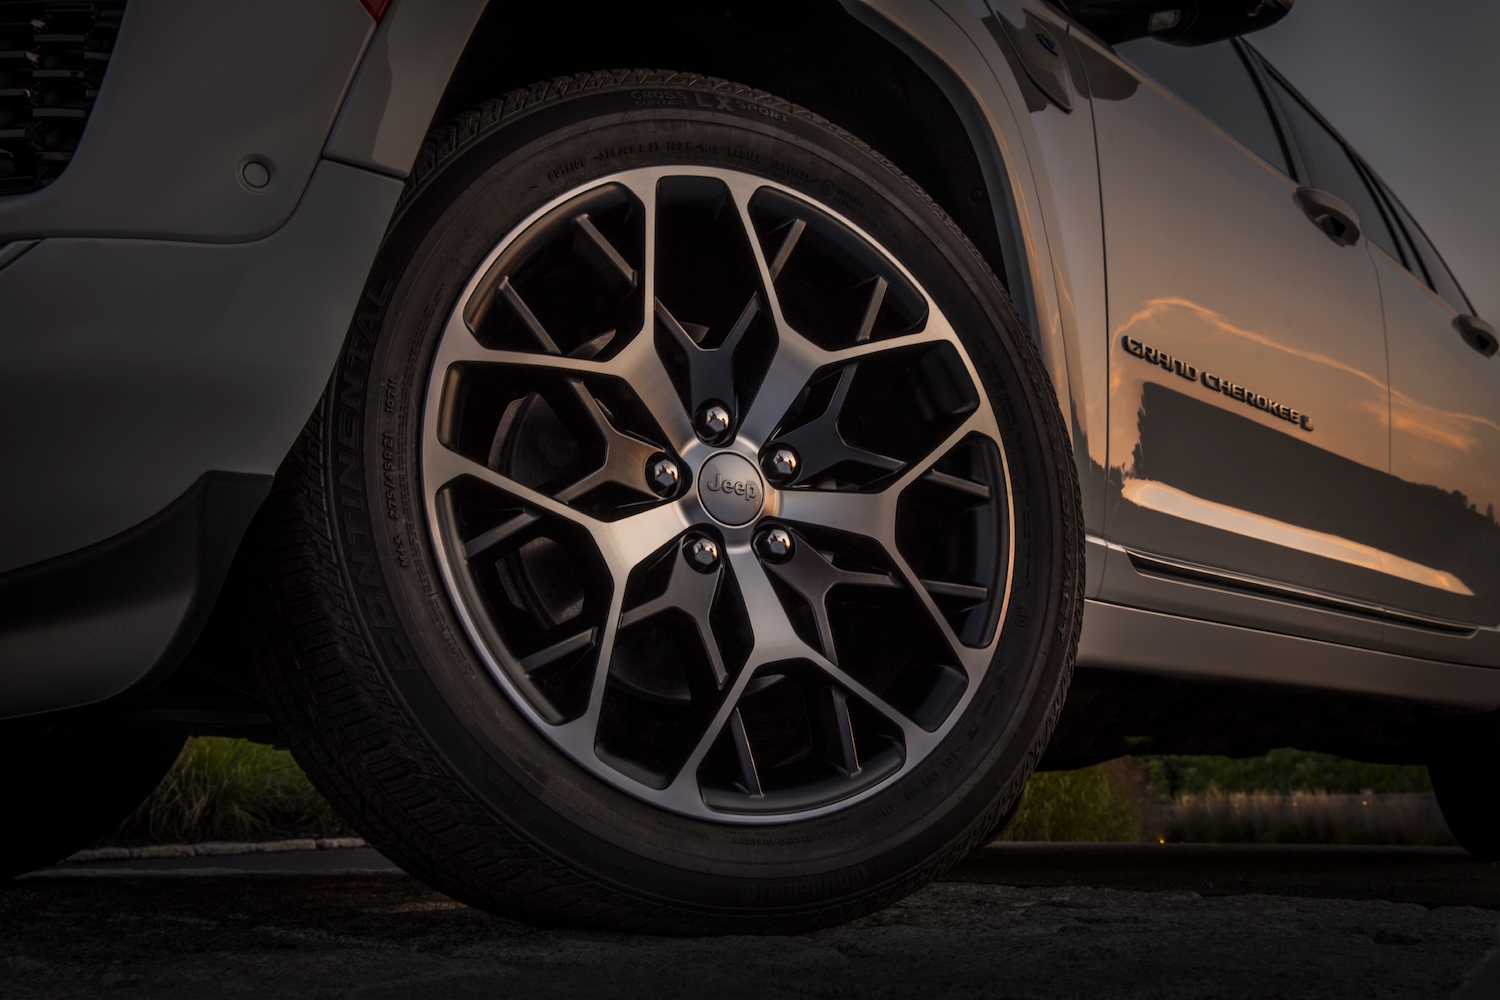 Closeup of the 20 inch rims and low-profile sized tires of the Jeep Grand Cherokee Summit Reserve.